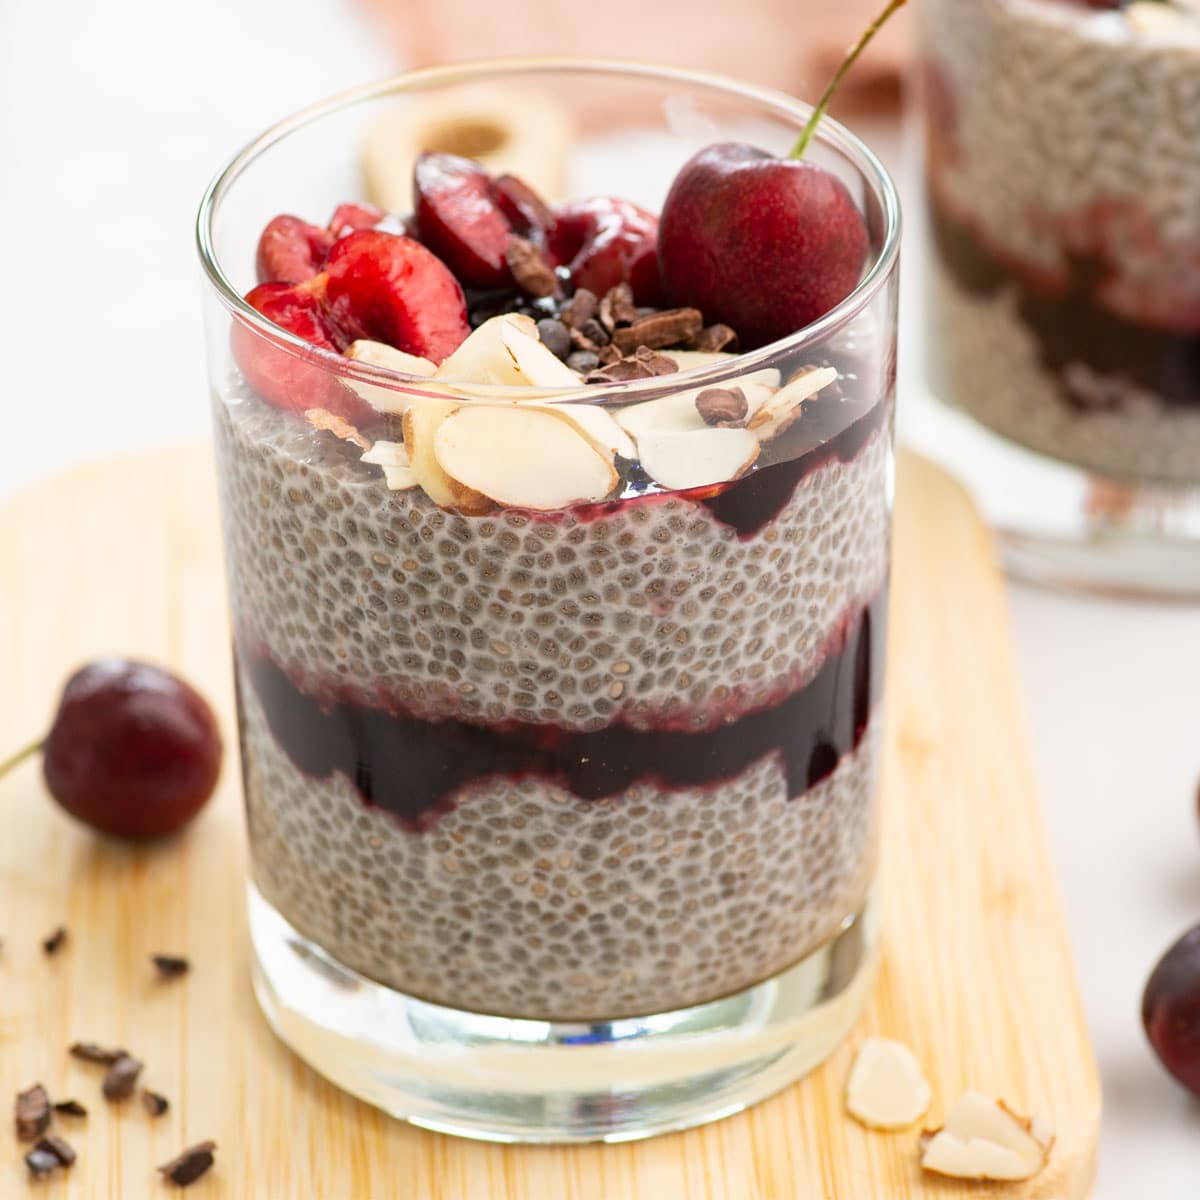 Vegan Chia Pudding with Cherry Compote - Mindful Avocado